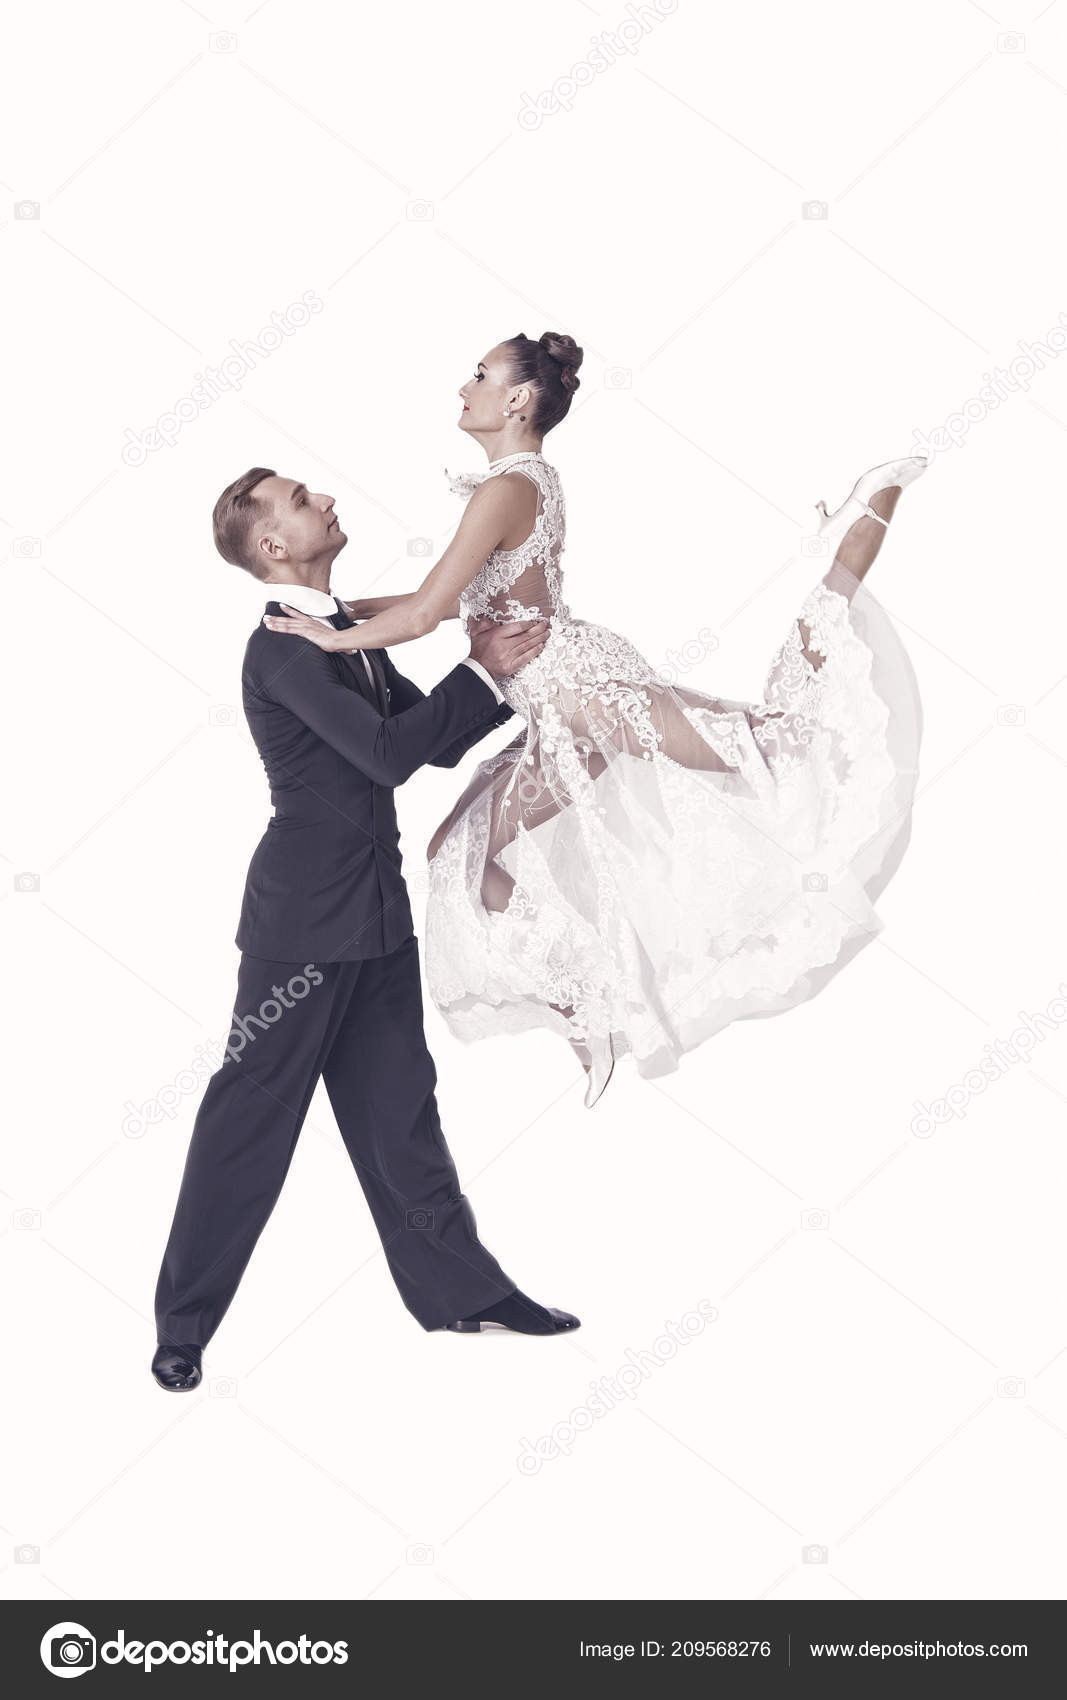 Ballrom Dance Couple In A Dance Pose Isolated On White